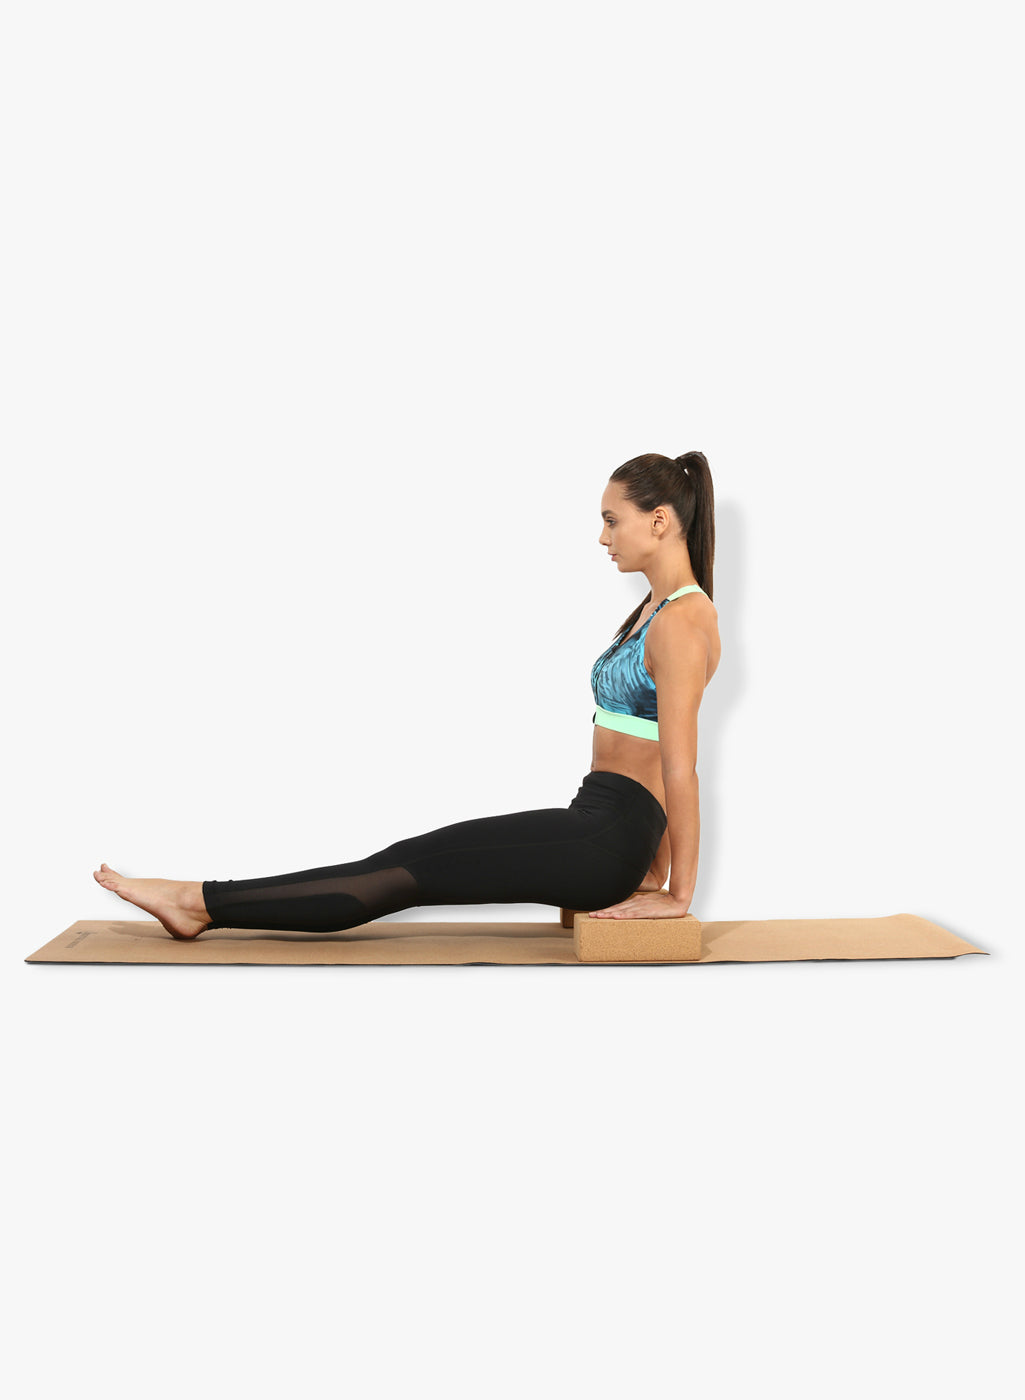 How To Use Blocks To Enhance Your Yoga Workout